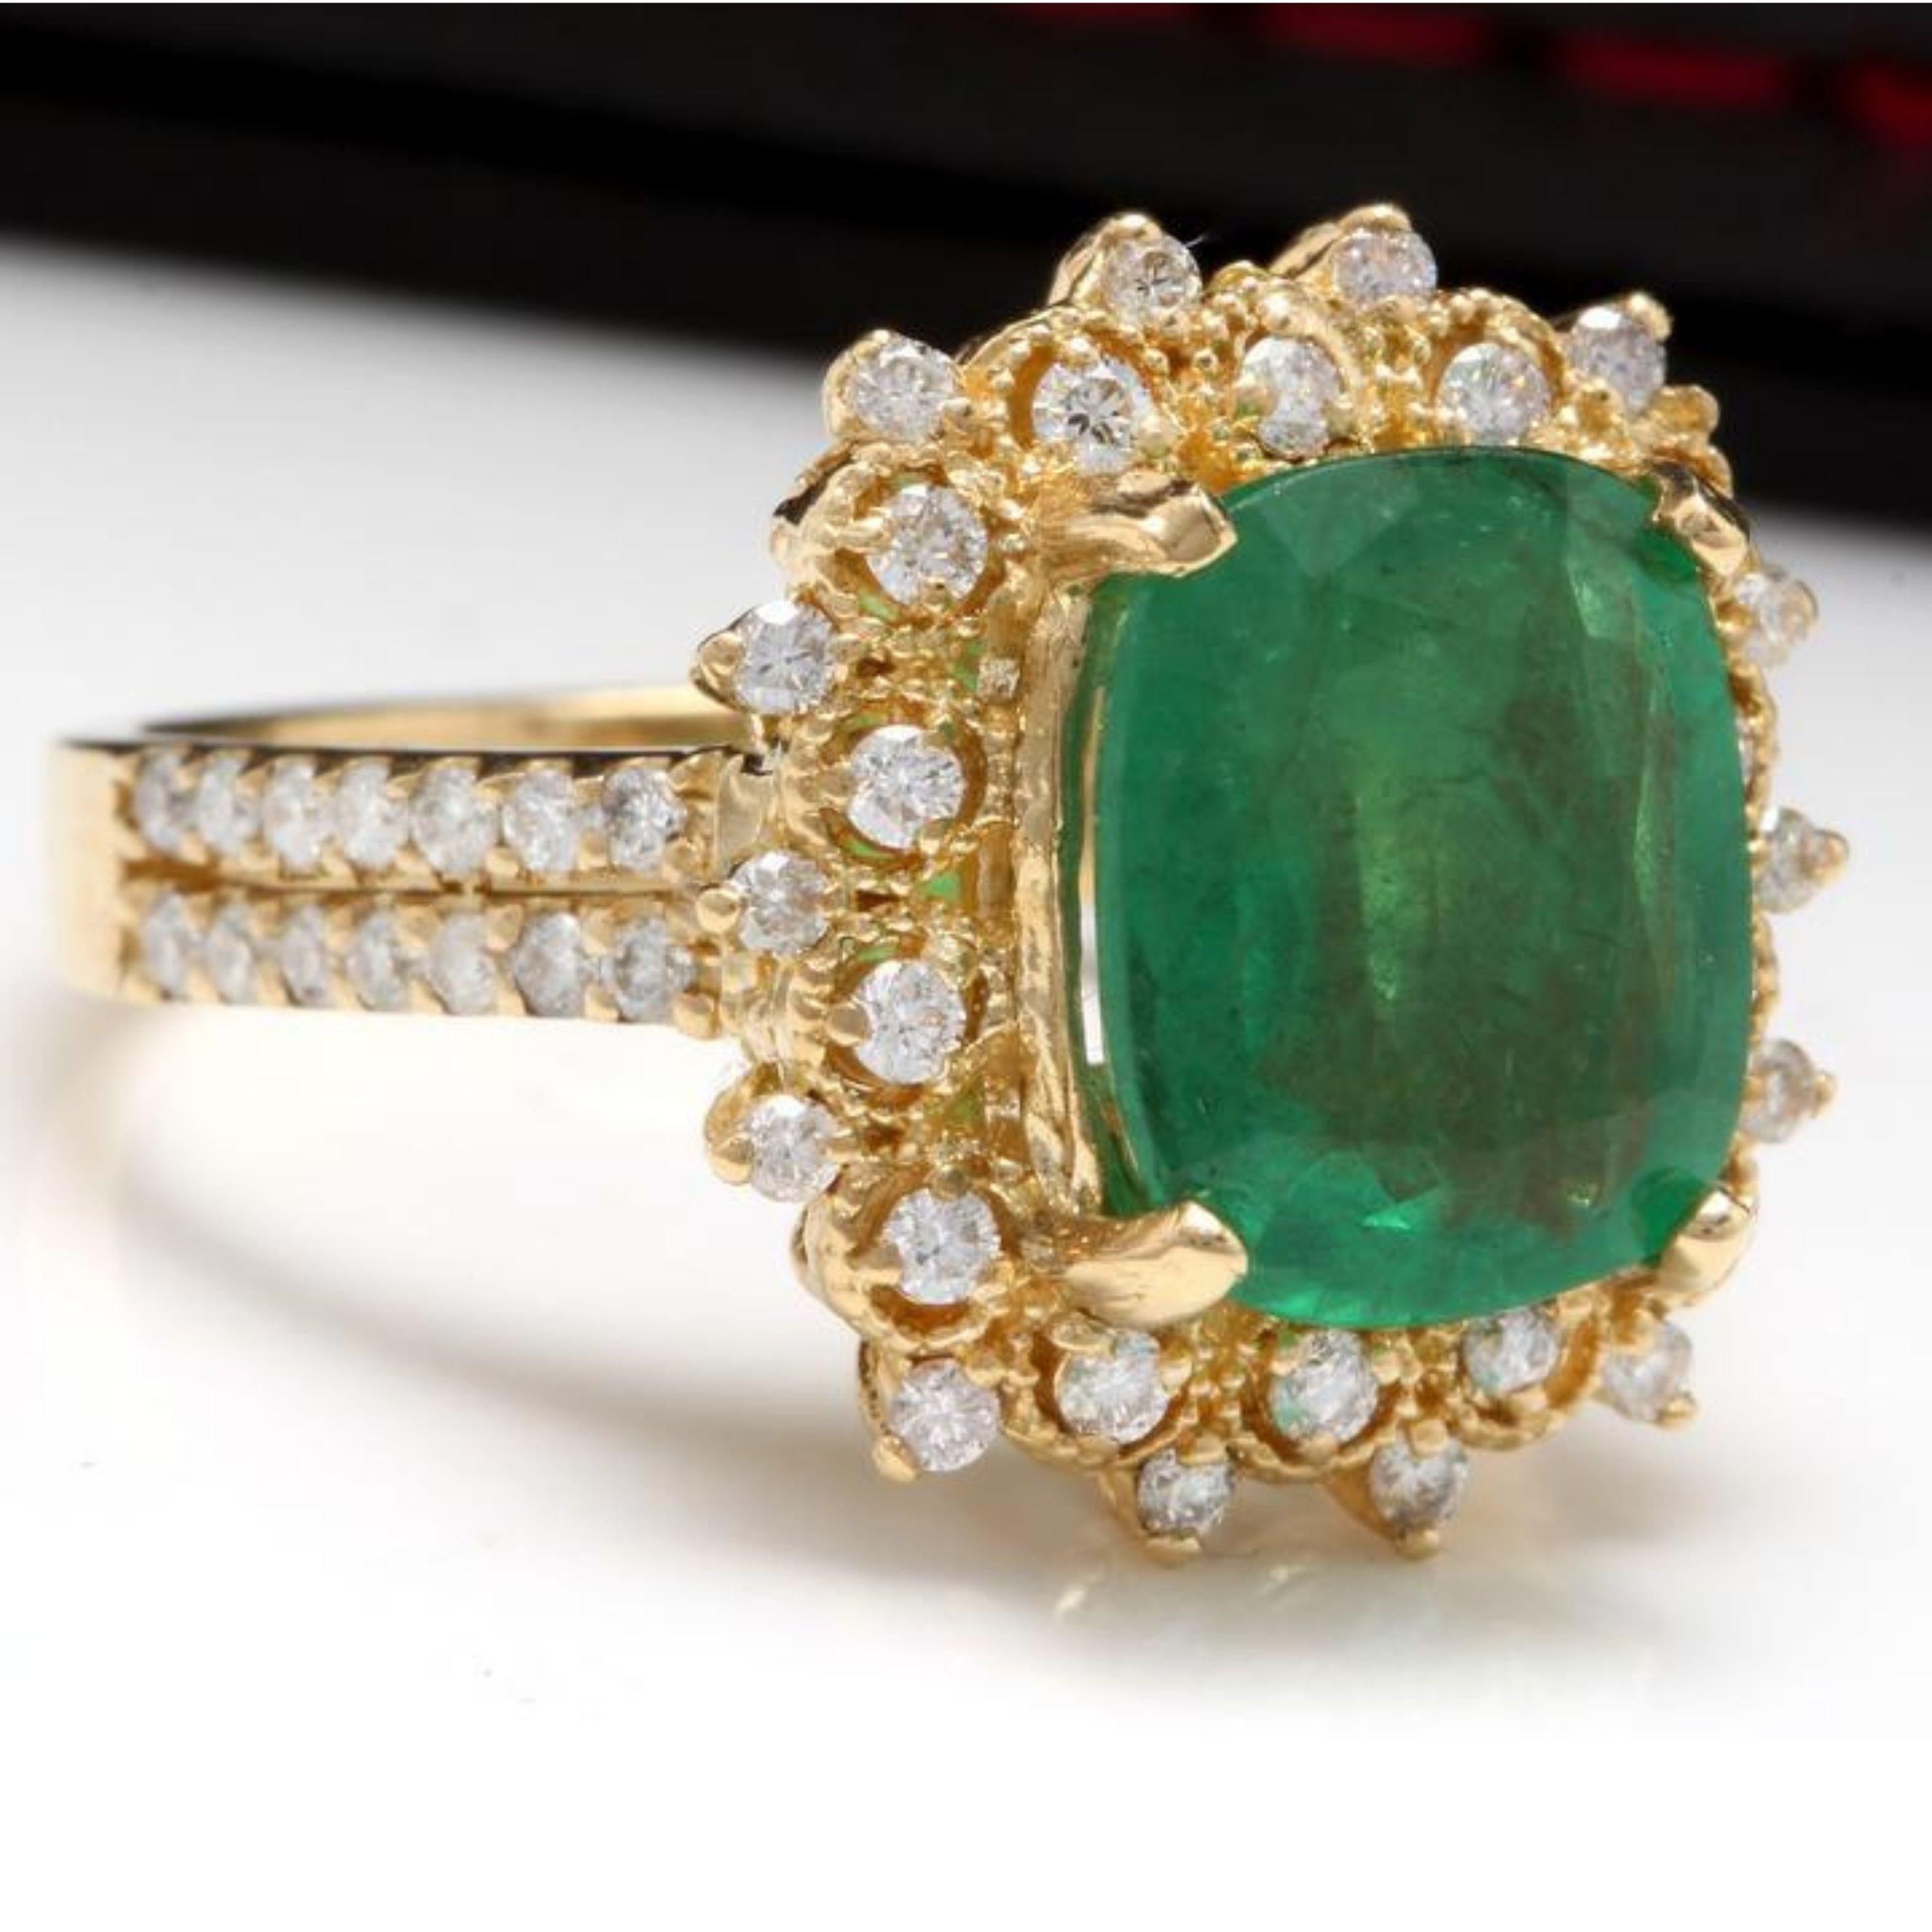 4.50 Carats Natural Emerald and Diamond 14K Solid Yellow Gold Ring

Total Natural Cushion Cut Emerald Weight is: 3.50 Carats (transparent )

Emerald Measures: 10.40 x 8.50mm

Natural Round Diamonds Weight: 1.00 Carats (color G-H / Clarity SI1)

Ring